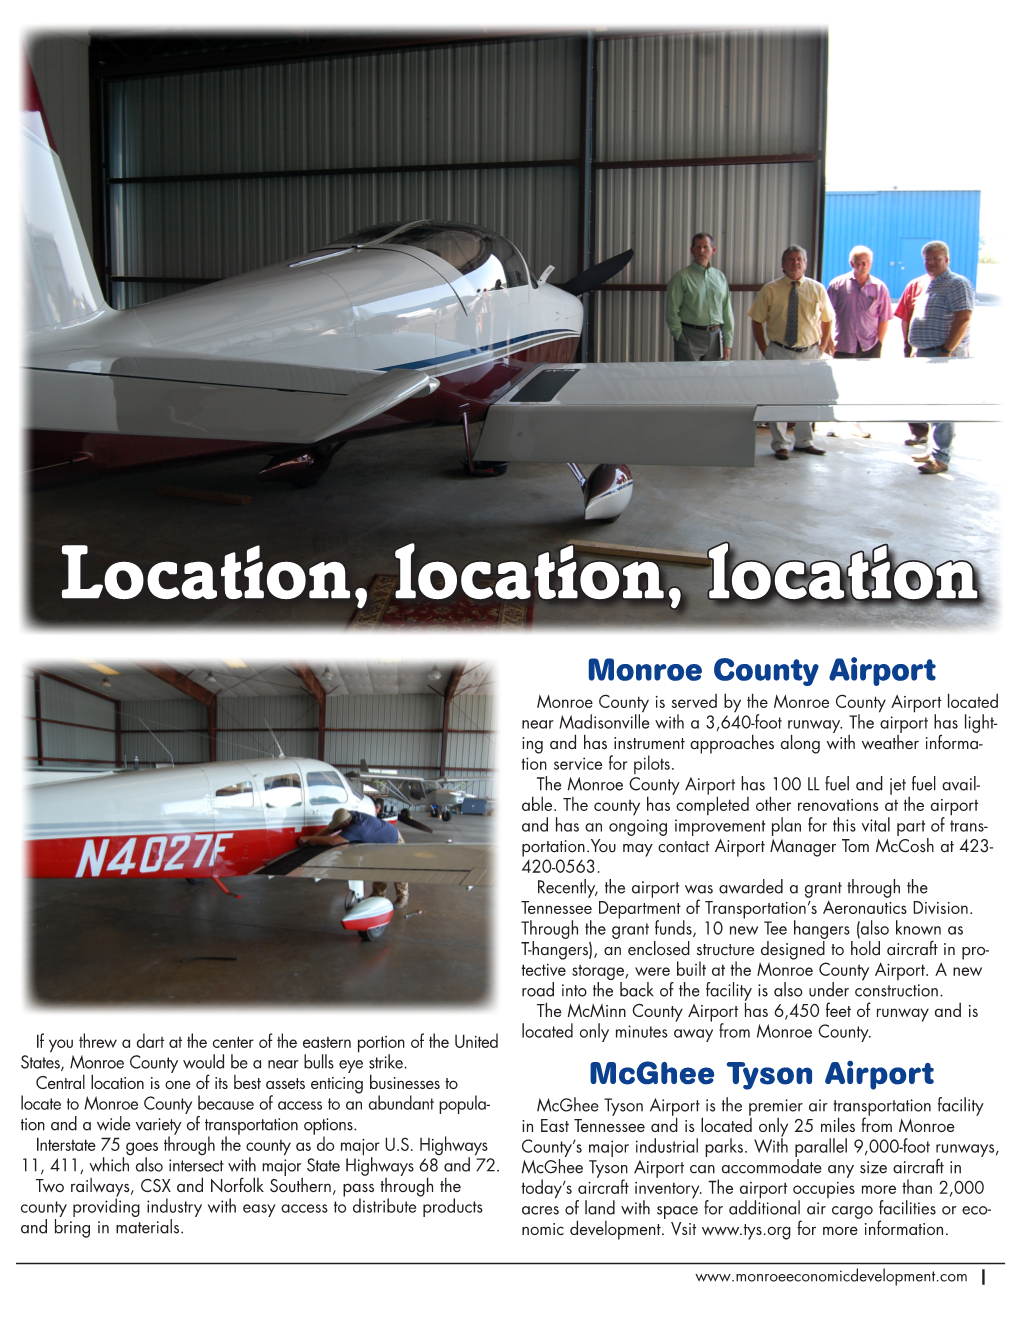 Monroe County Airport Monroe County Is Served by the Monroe County Airport Located Near Madisonville with a 3,640-Foot Runway